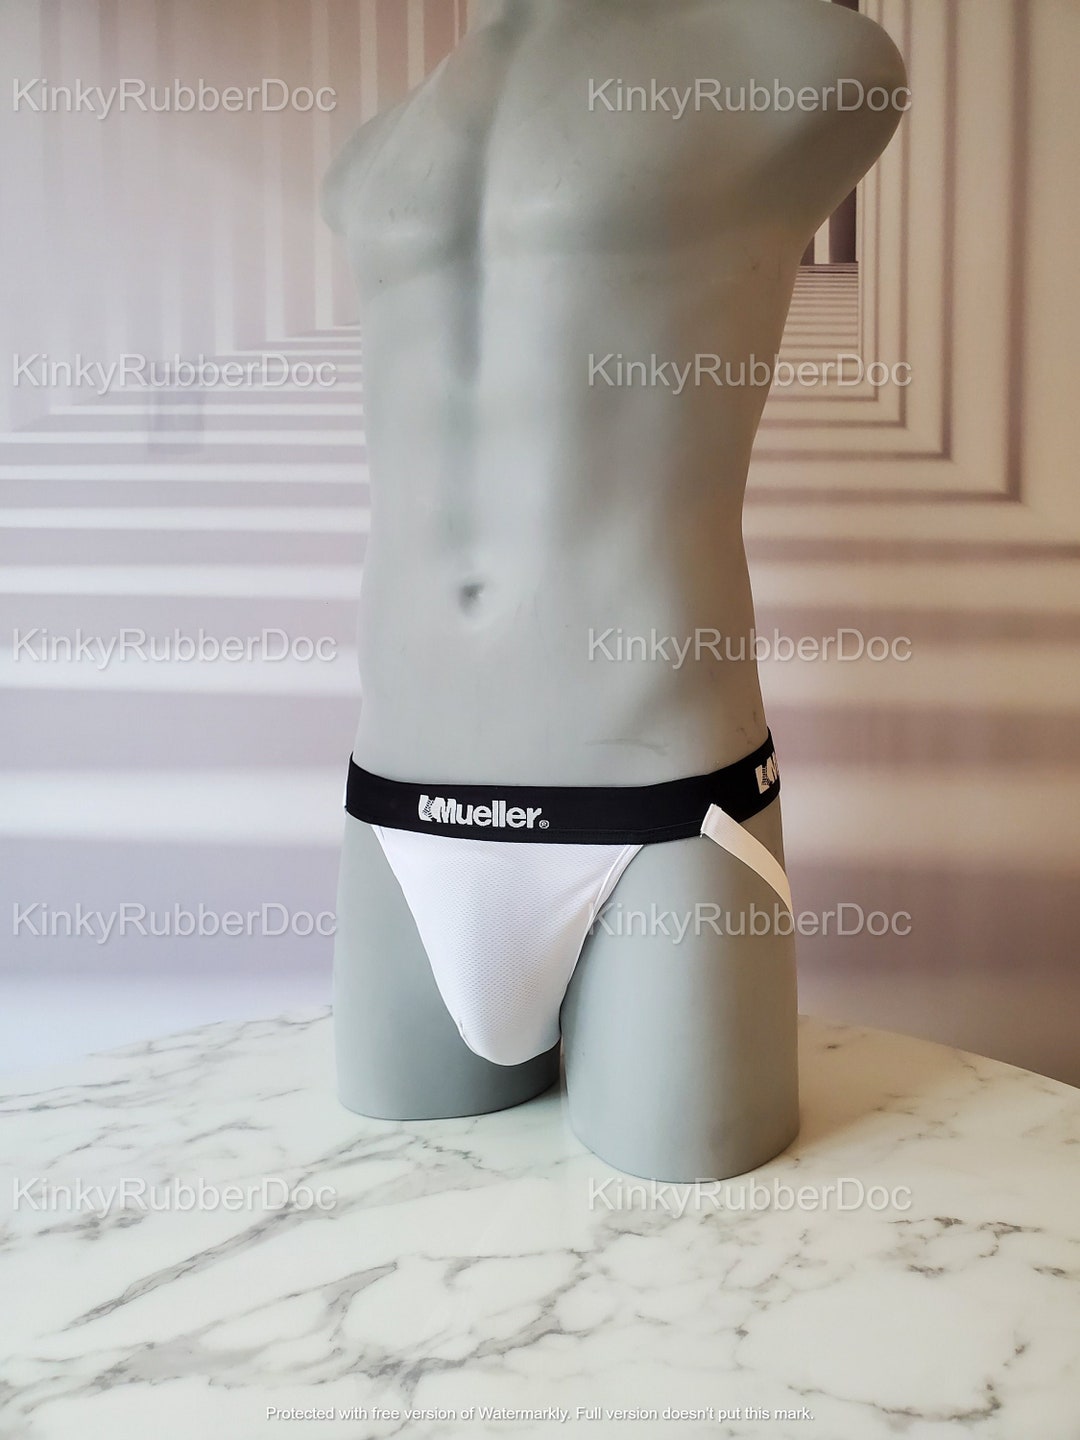 Pouch Jock Strap Support Underwear Soft Jock Straps Male Athletic  Supporters for Men Showing Off Bubble Butt Knickers